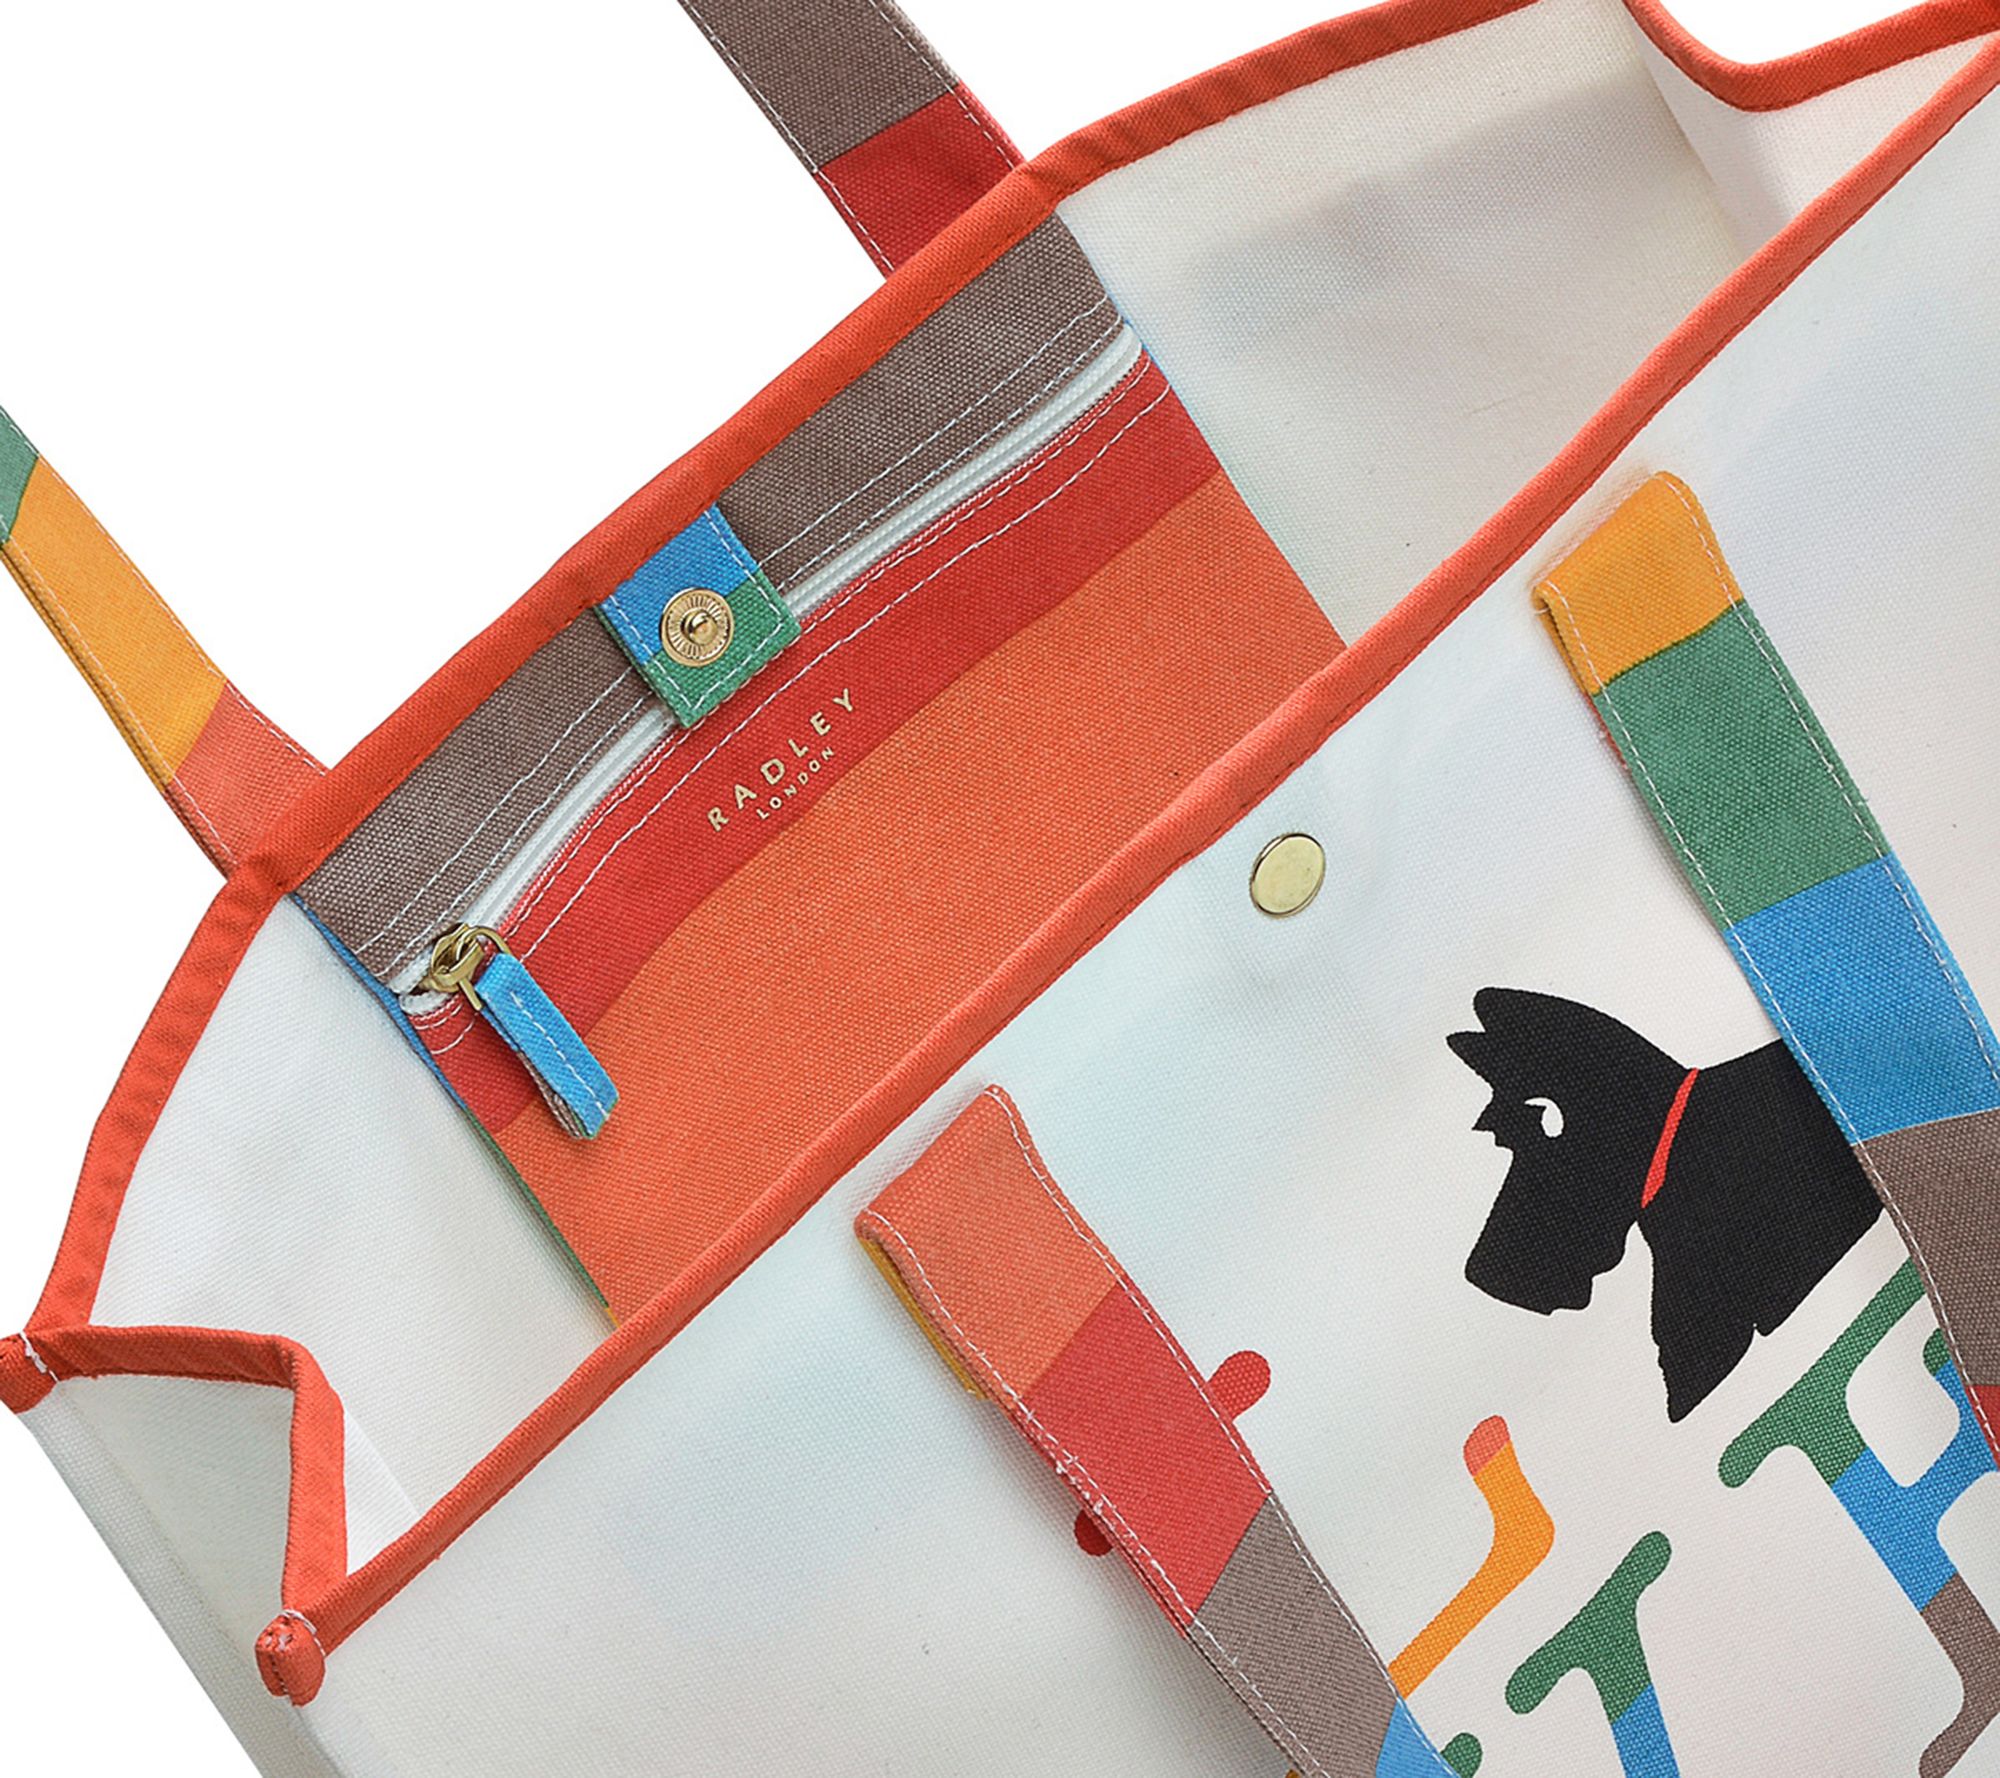 Radley Pride 2021: bag brand teams up with Stonewall to create new tote